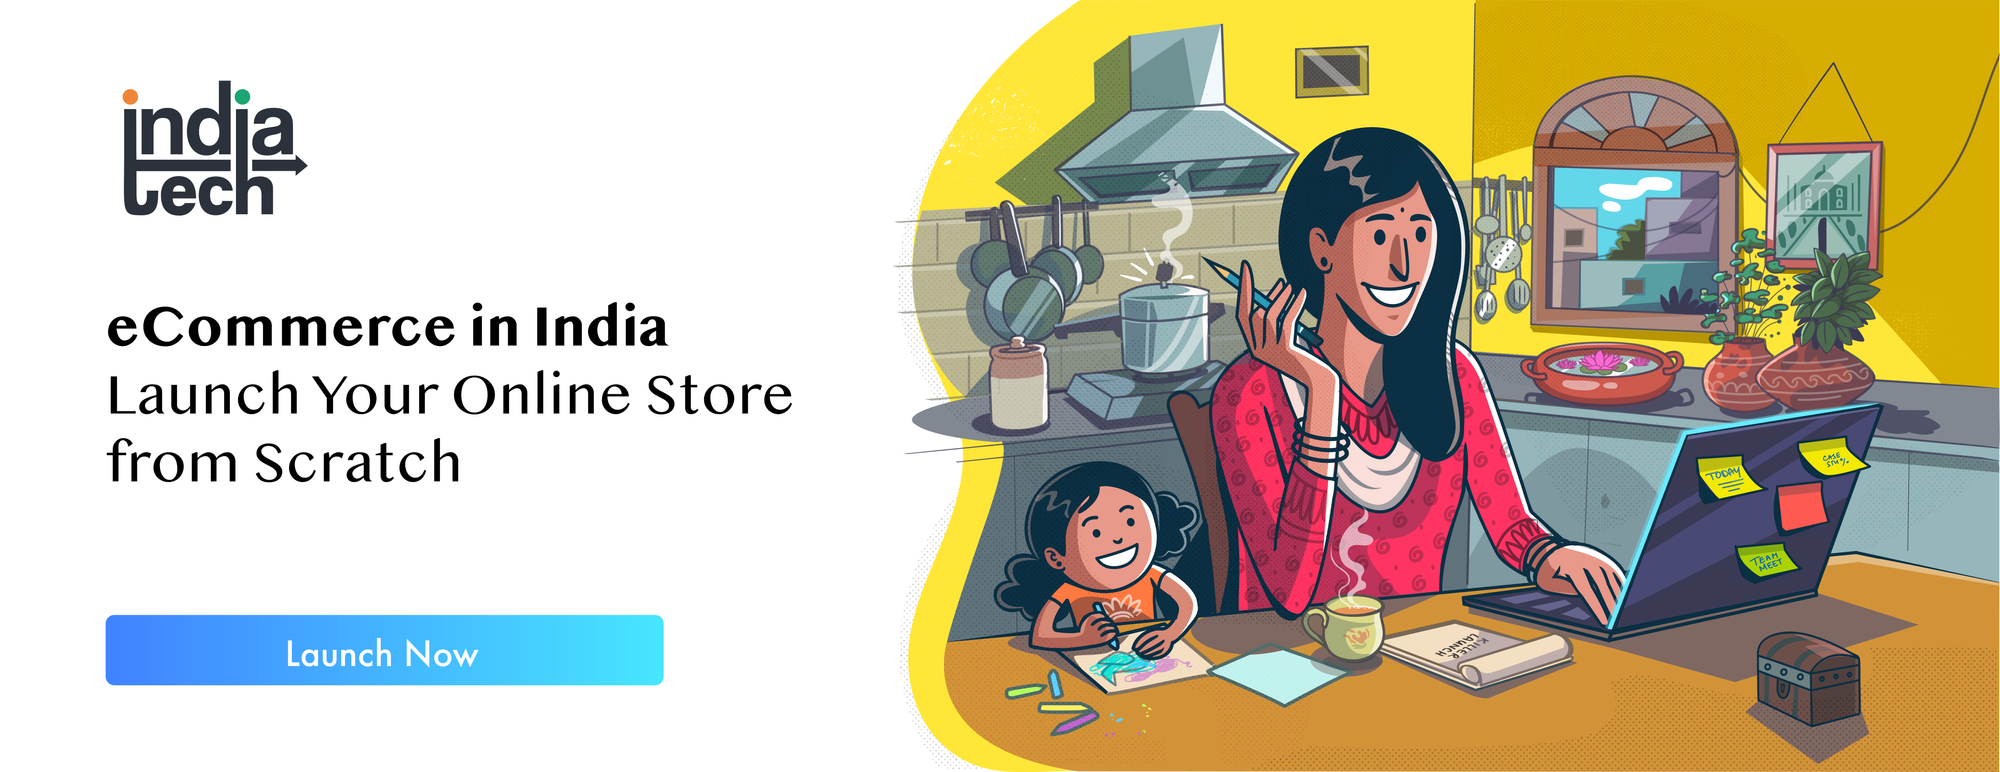 eCommerce in India: How to Build and Launch Your Online Store from Scratch